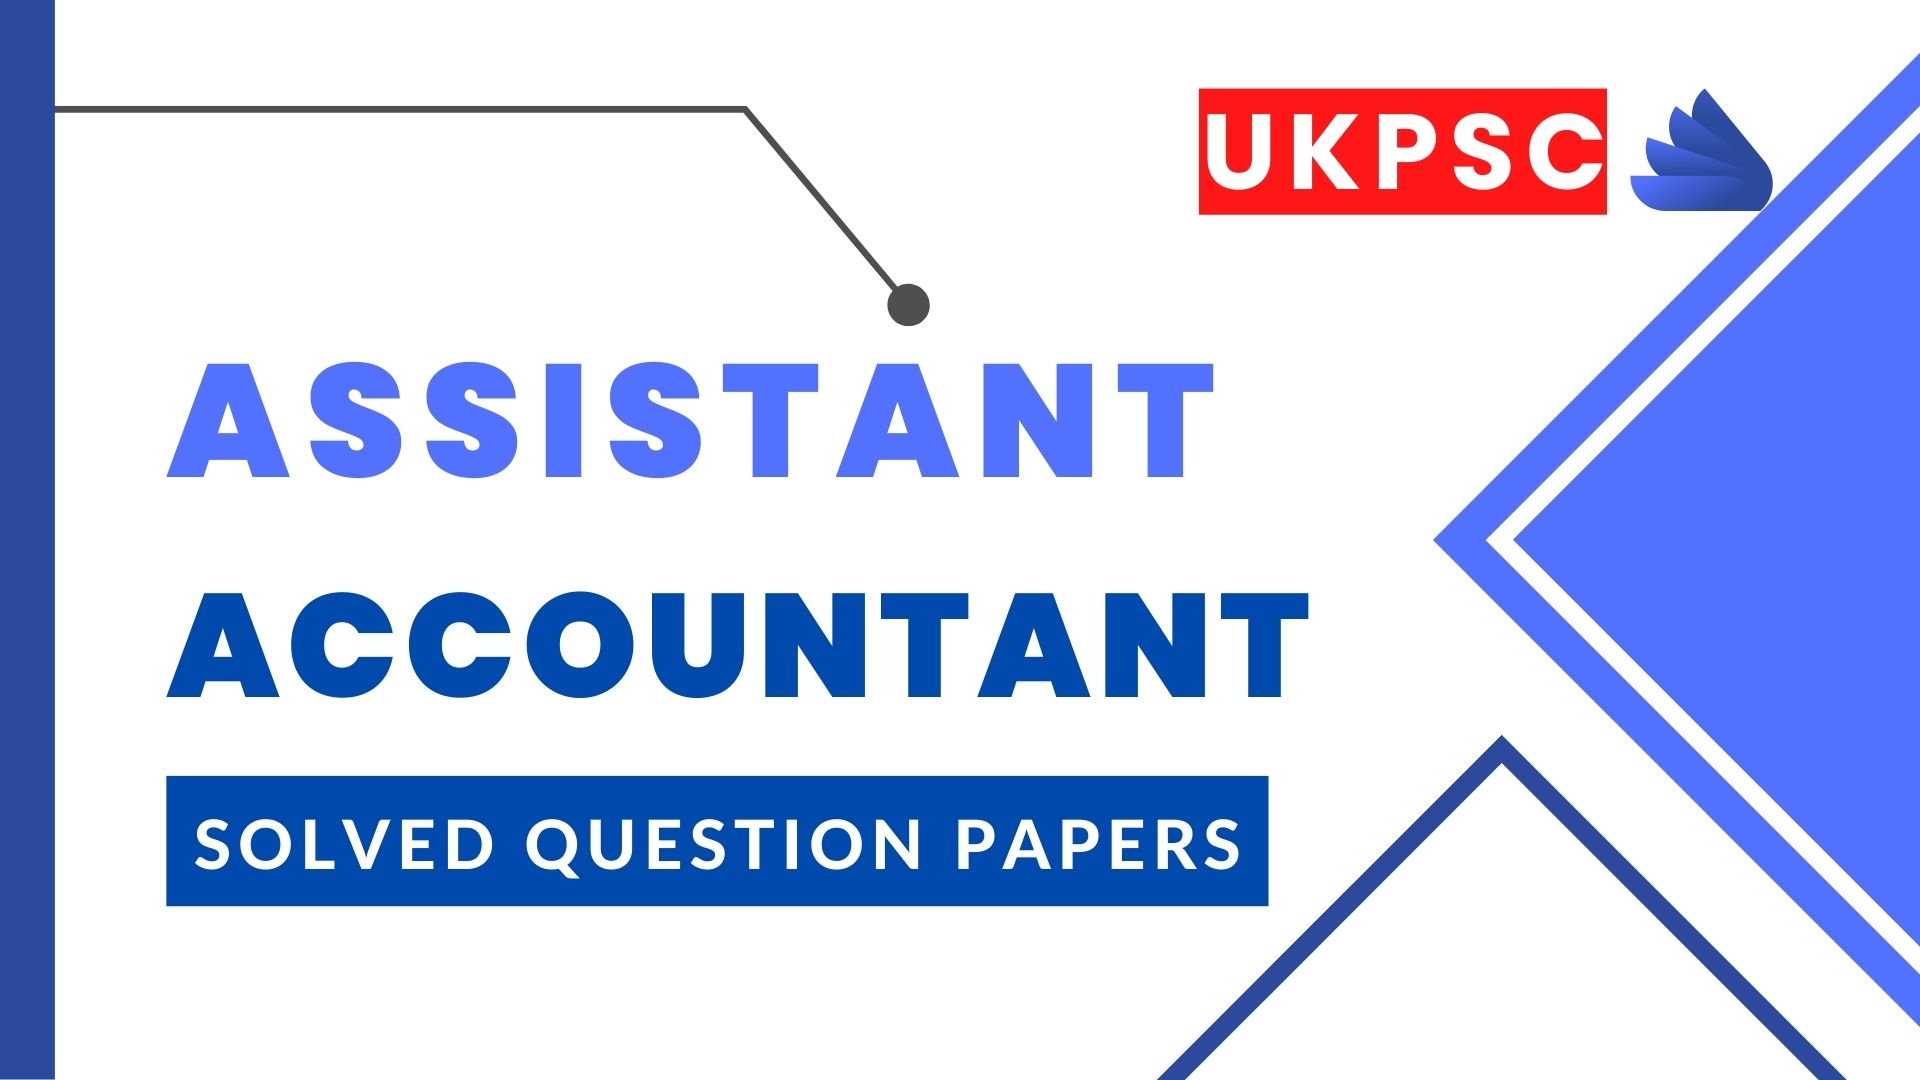 ukpsc assistant accountant solved question paper 2016